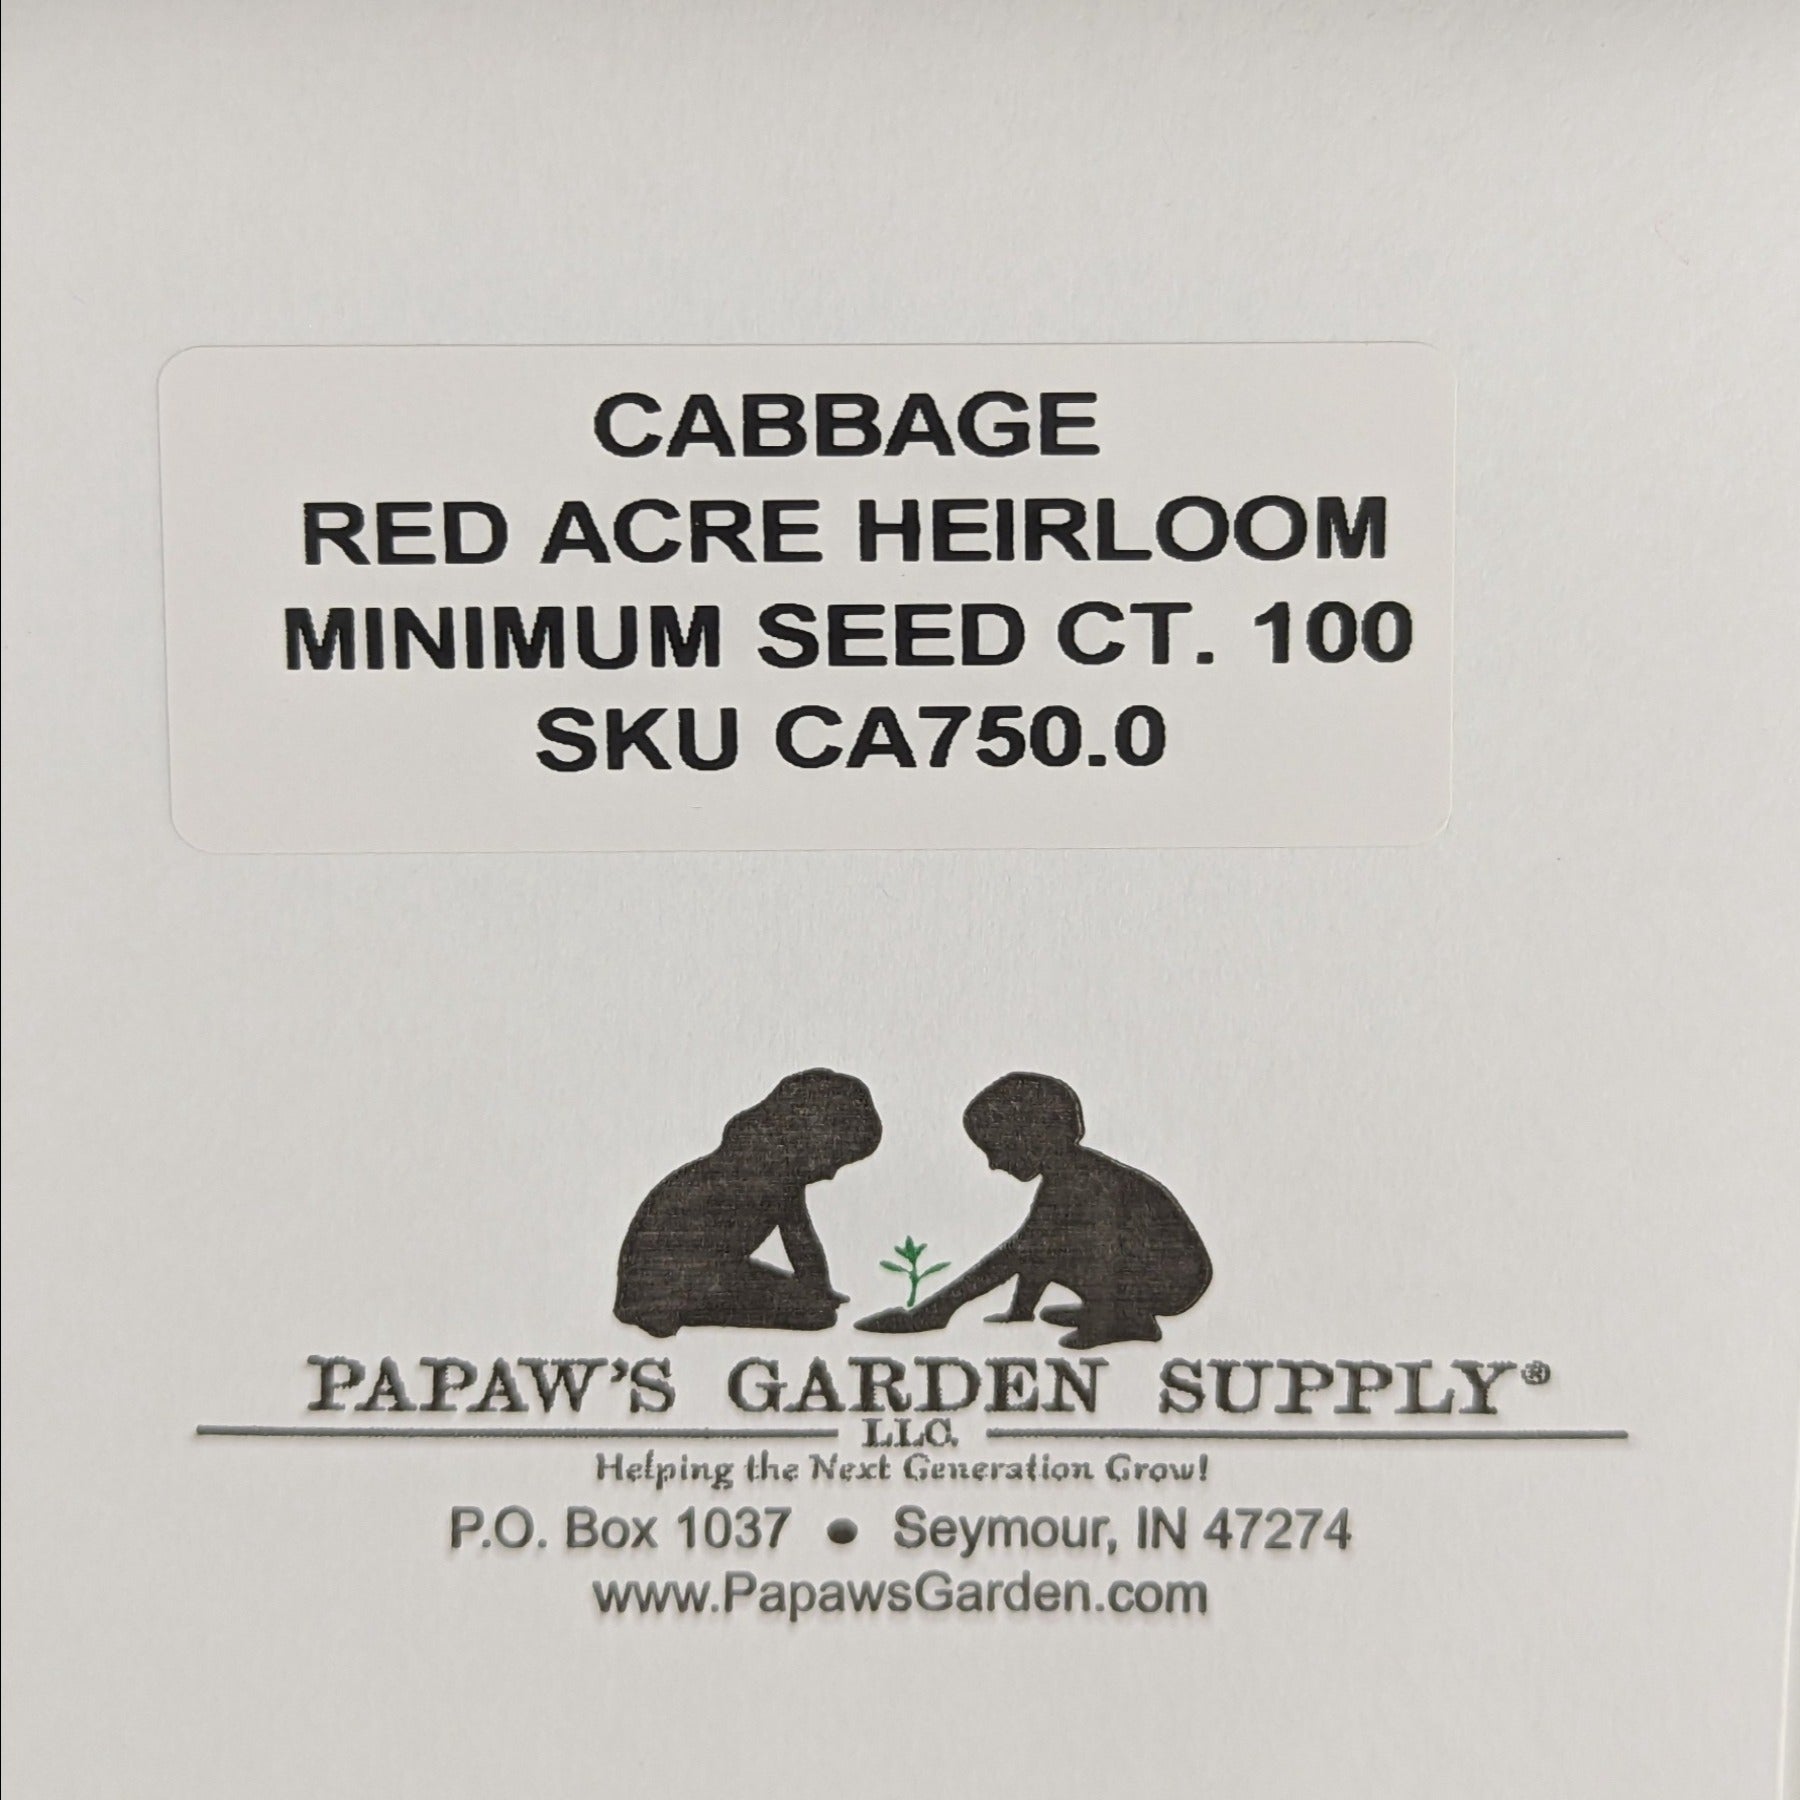 Red Acre Heirloom Cabbage Seeds